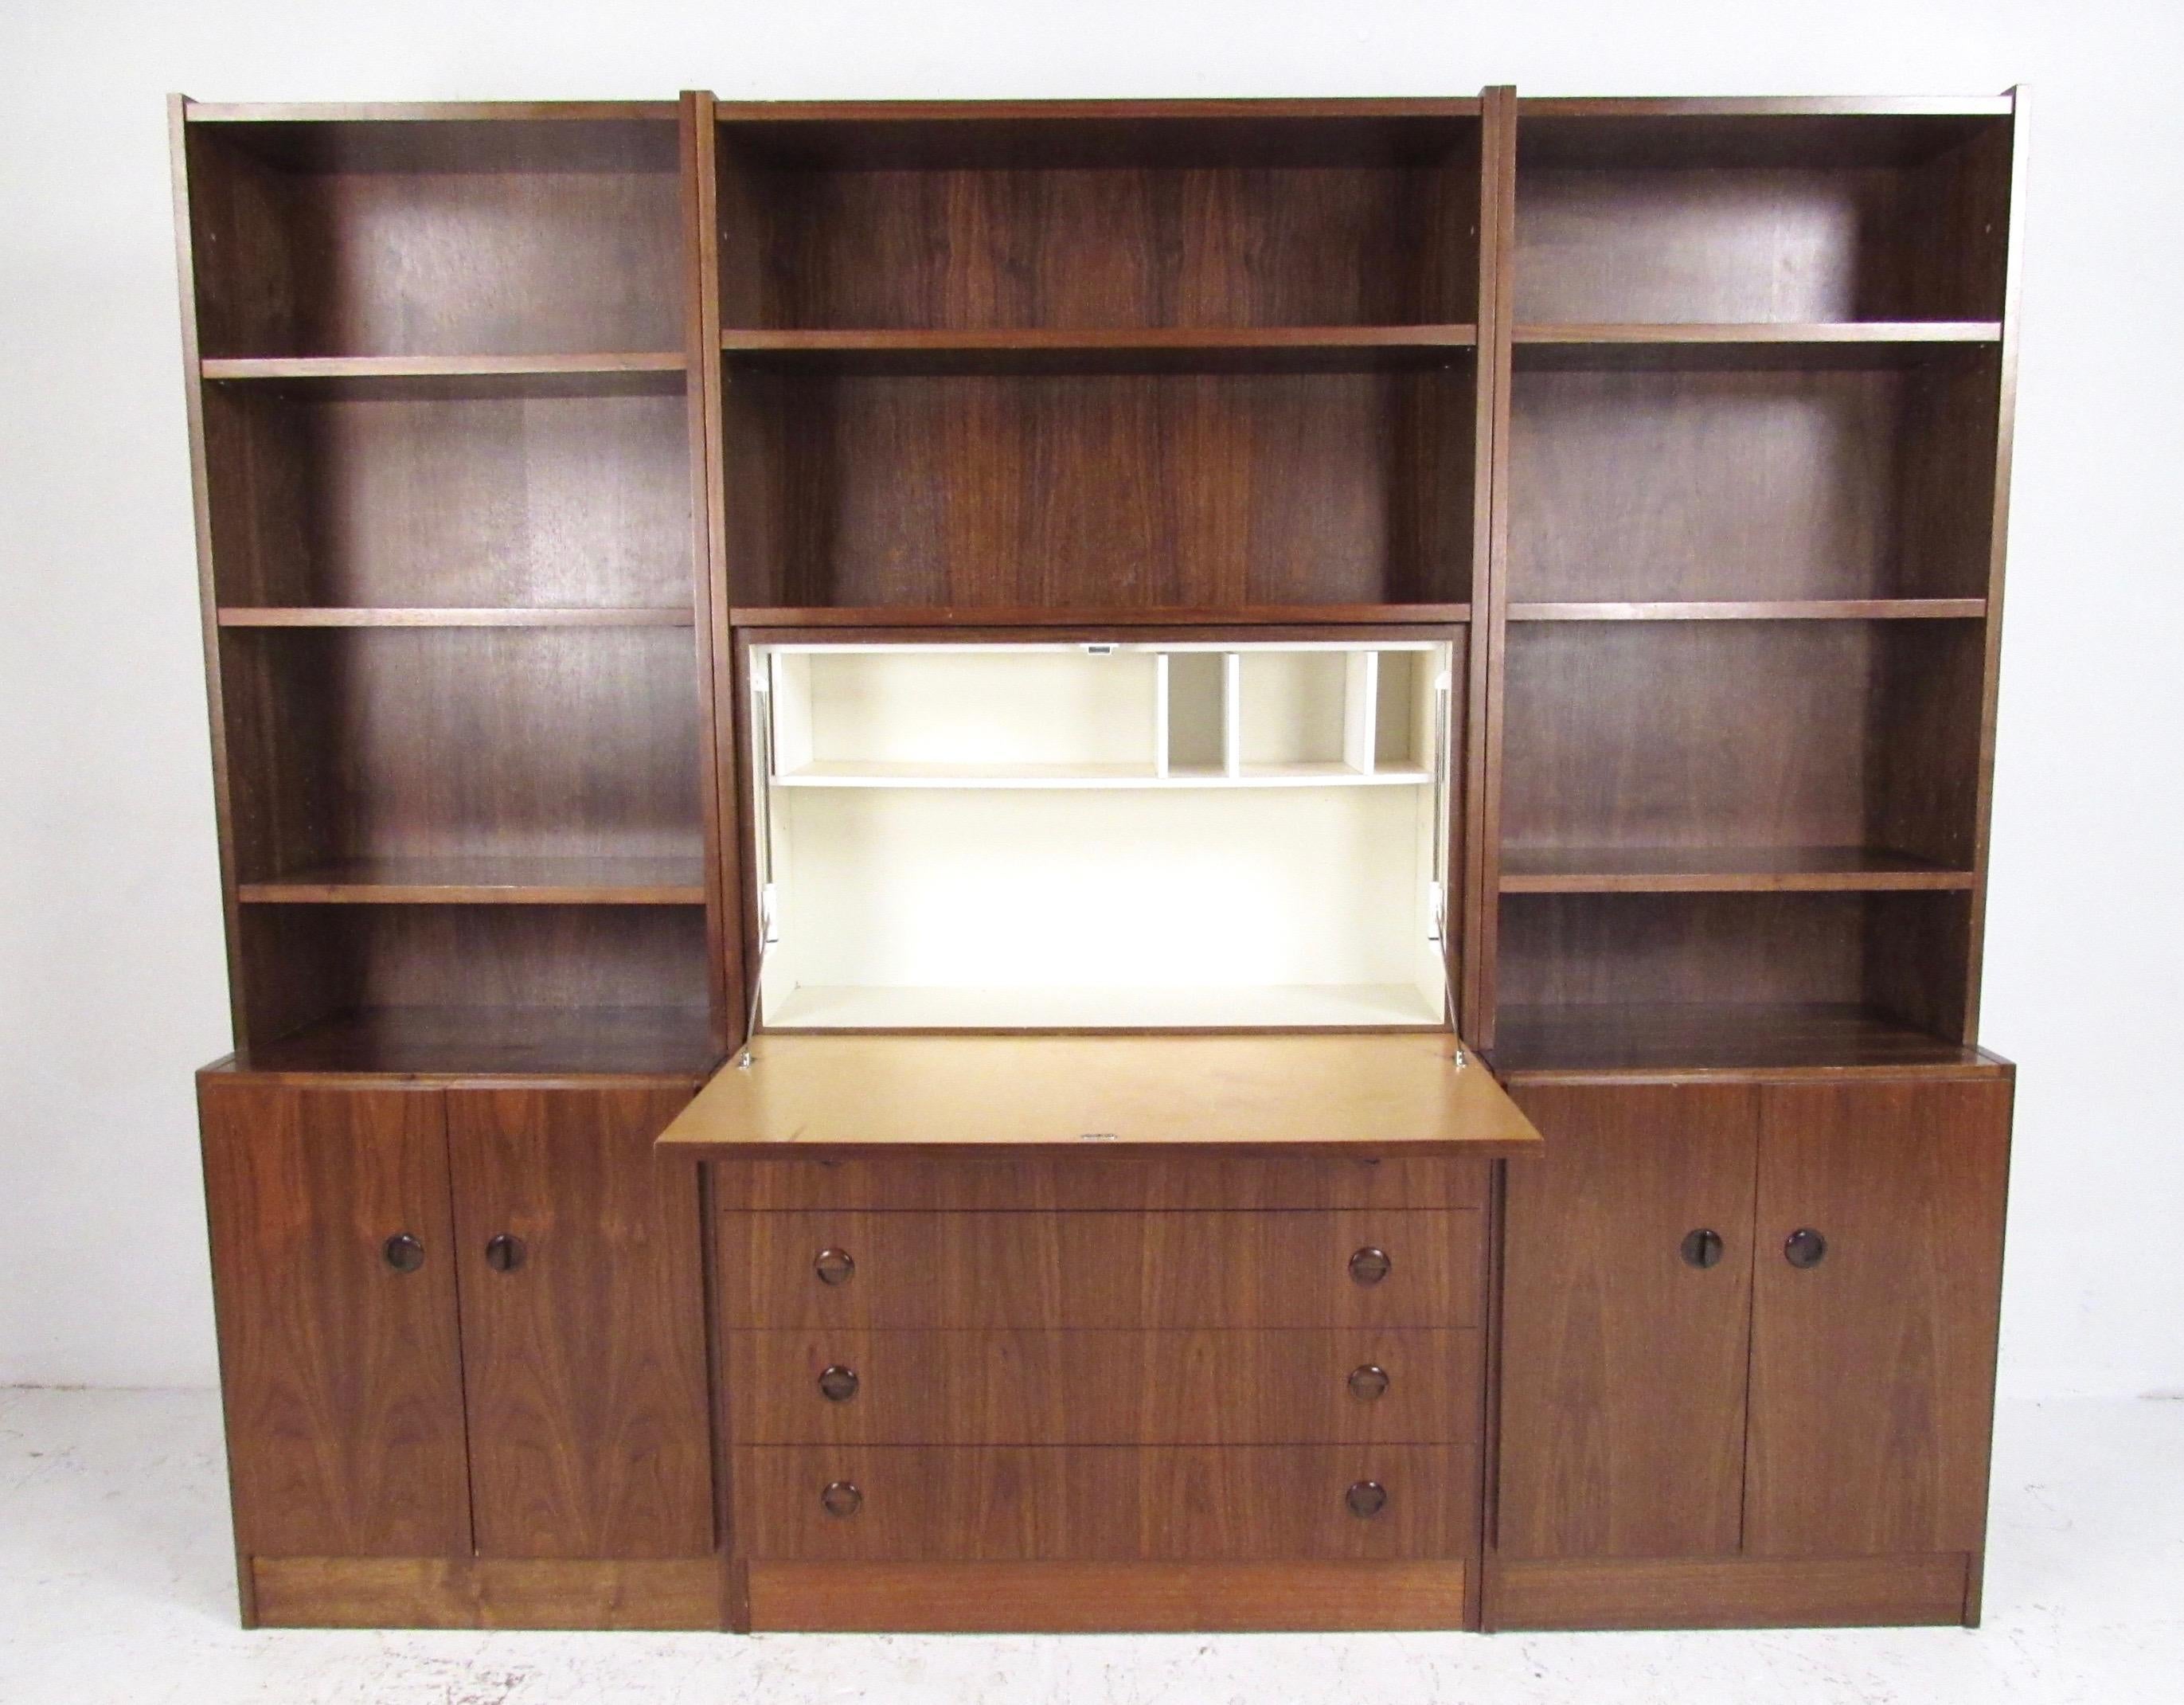 This stylish seven foot wide bookcase features vintage walnut finish, spacious cabinet and drawer storage, and unique drop front work desk or bar area. Adjustable shelves and quality midcentury construction, this piece was originally produced in